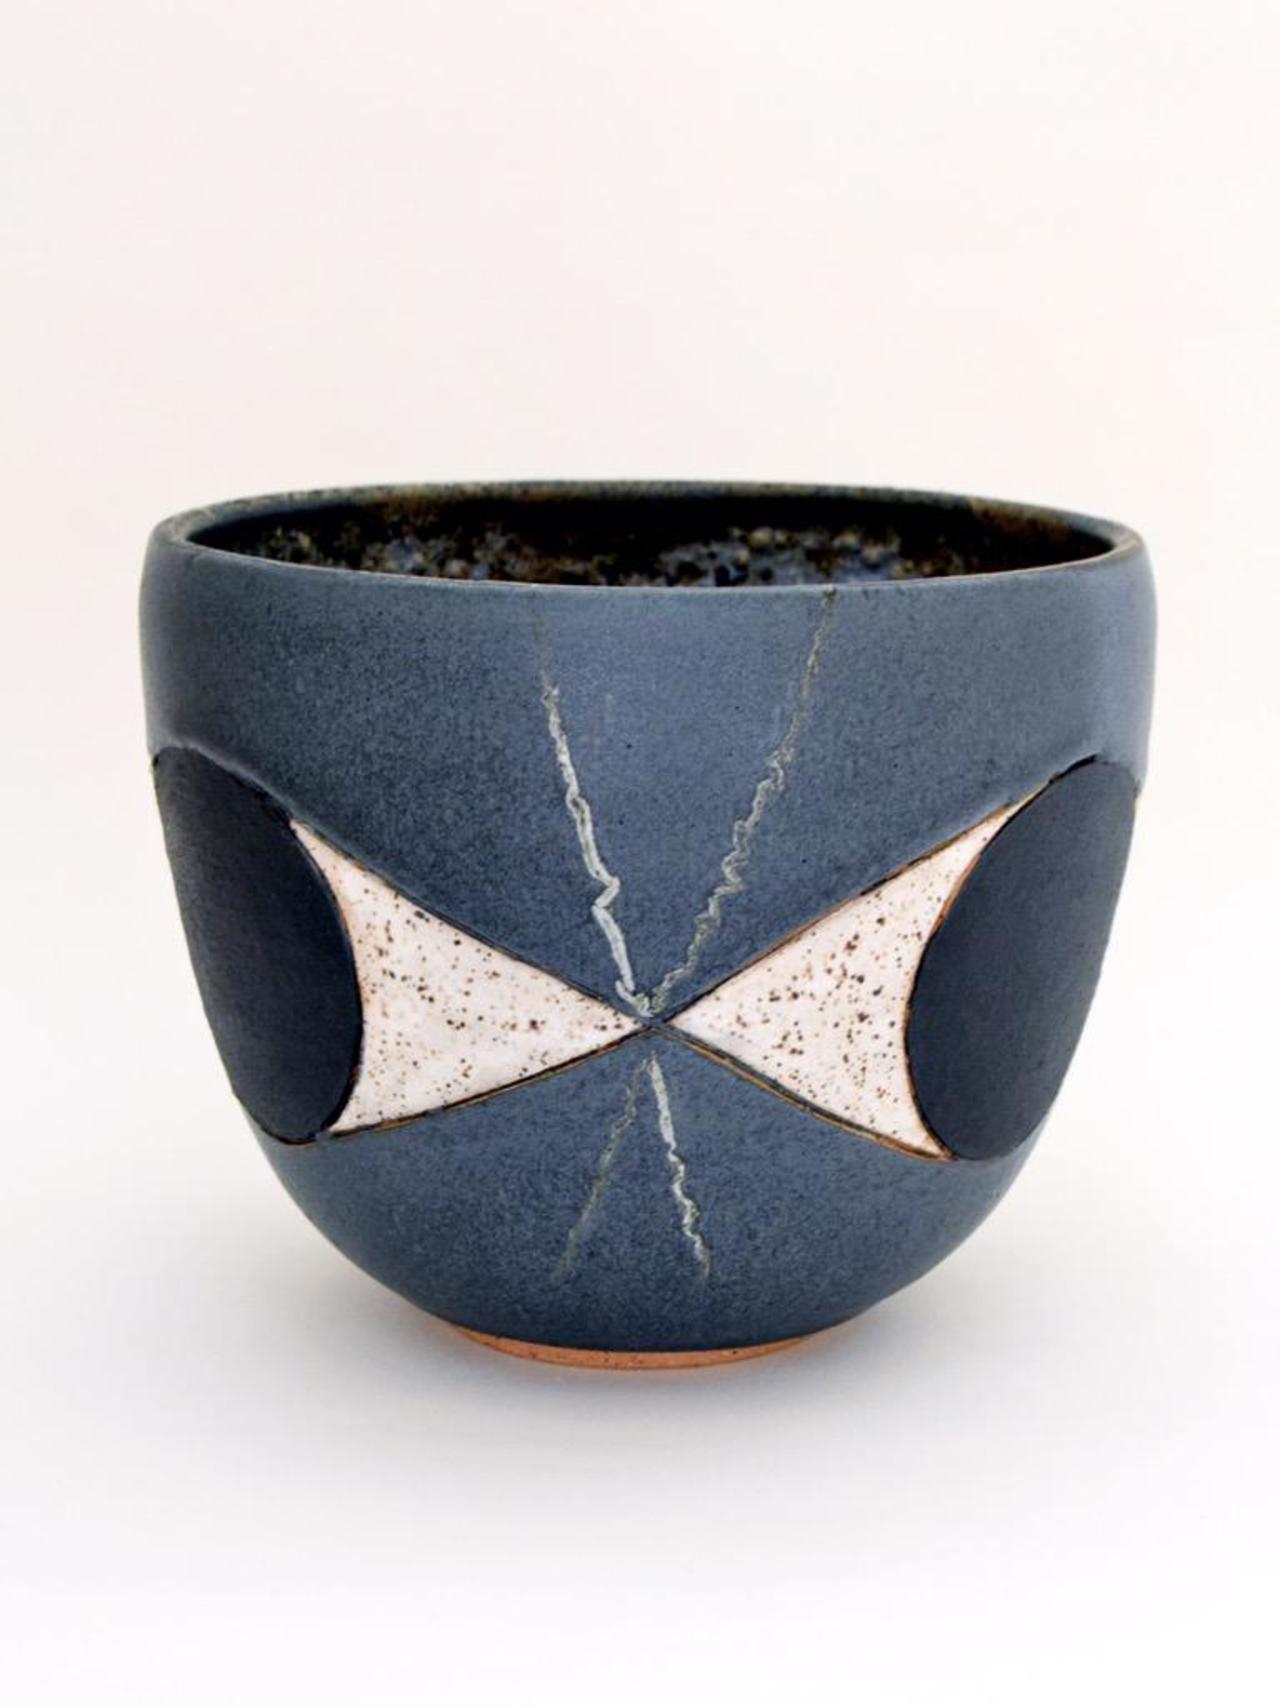 #highend #handmade #ceramics from Matthew Ward inspired by #midcentury #art and #design @BKLYNDESIGNS #nycxdesign http://t.co/xLHhHkd1kf